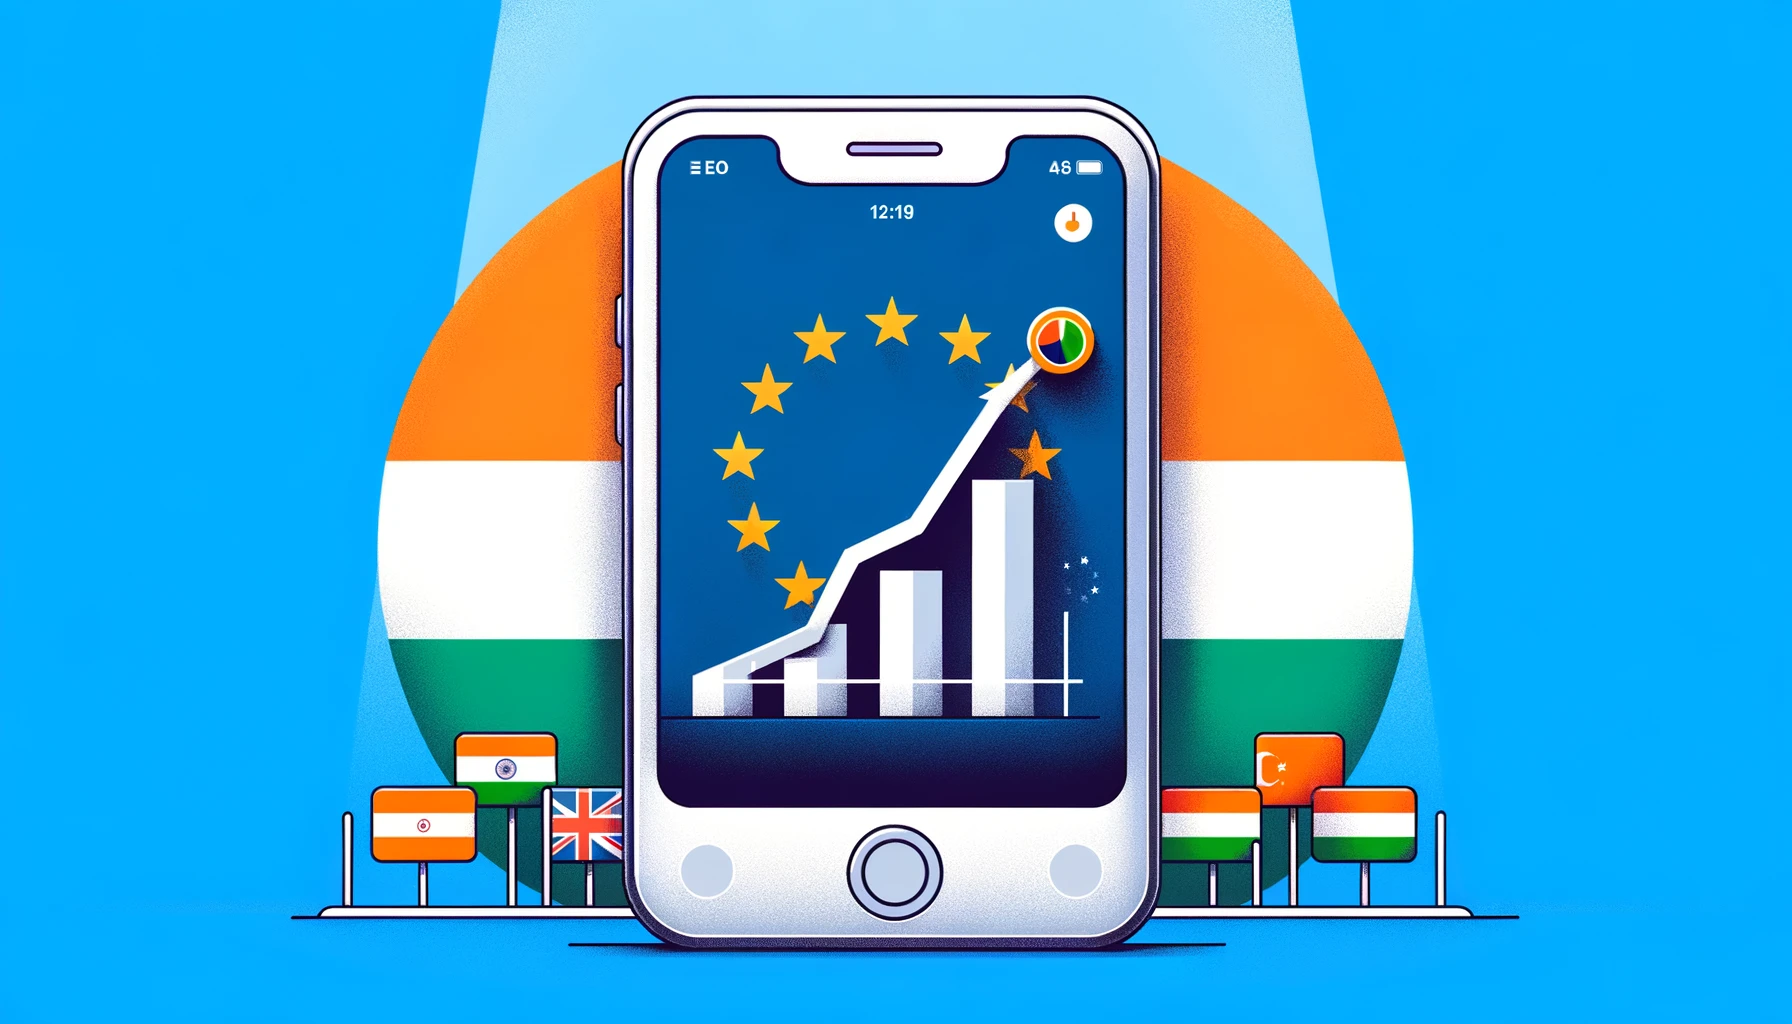 Morgan Stanley reports that Apple’s iPhone sales in India surpass those of any single EU country.